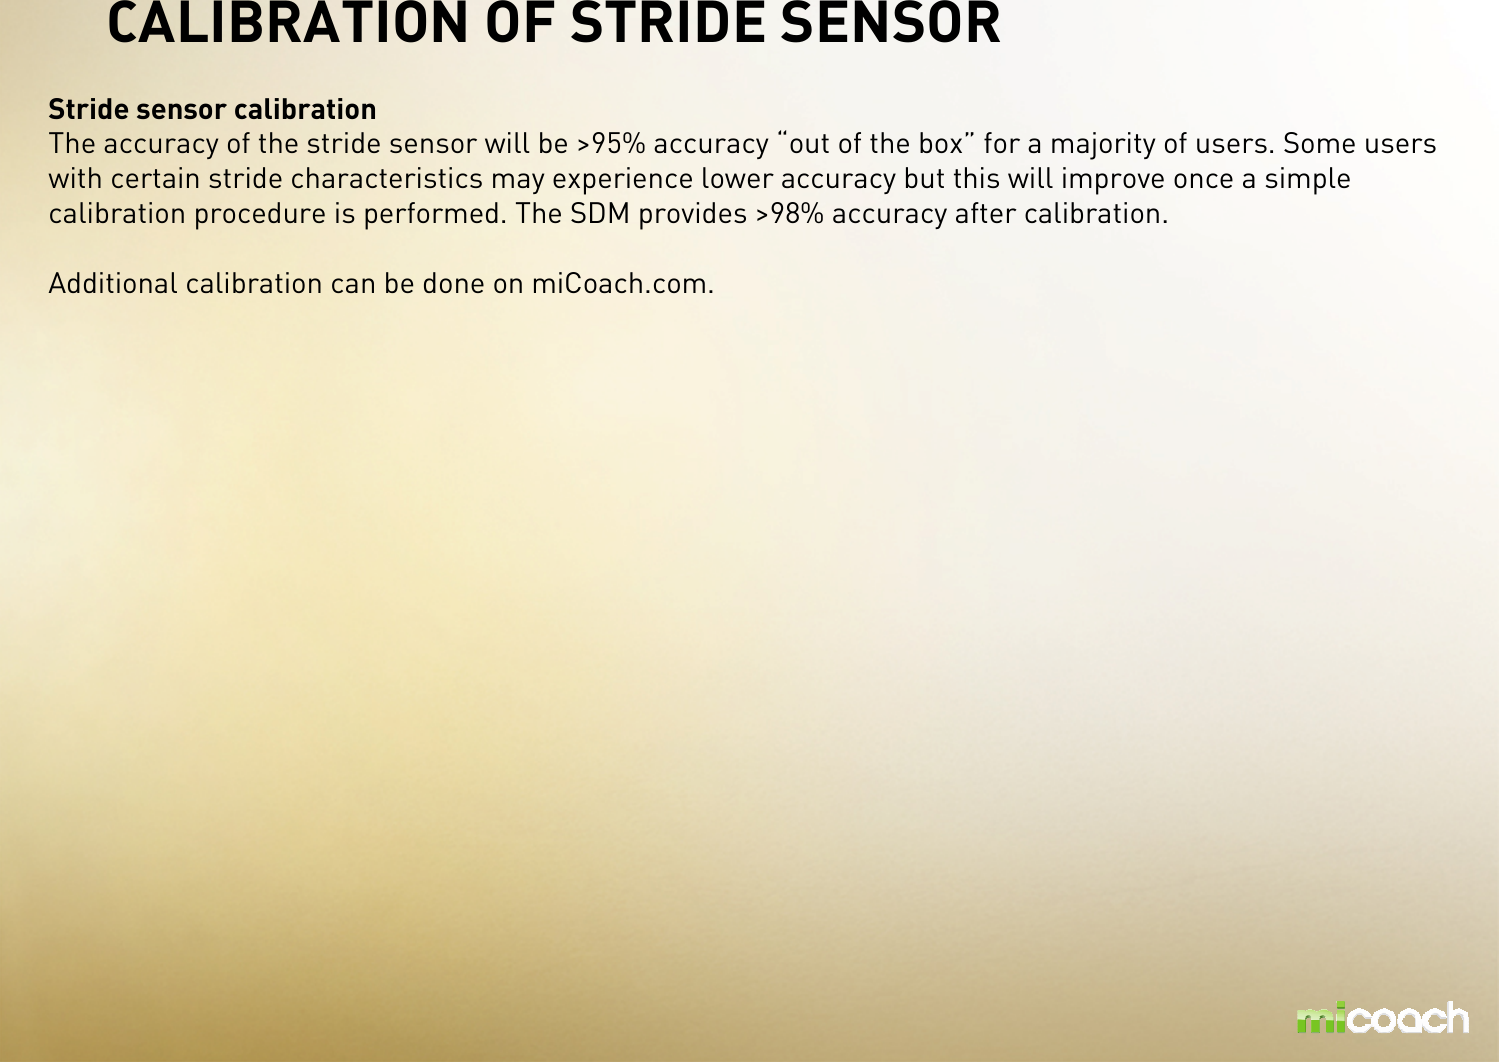 CALIBRATION OF STRIDE SENSORStride sensor calibrationThe accuracy of the stride sensor will be &gt;95% accuracy “out of the box” for a majority of users. Some users with certain stride characteristics may experience lower accuracy but this will improve once a simple calibration procedure is performed. The SDM provides &gt;98% accuracy after calibration.Additional calibration can be done on miCoach.com.